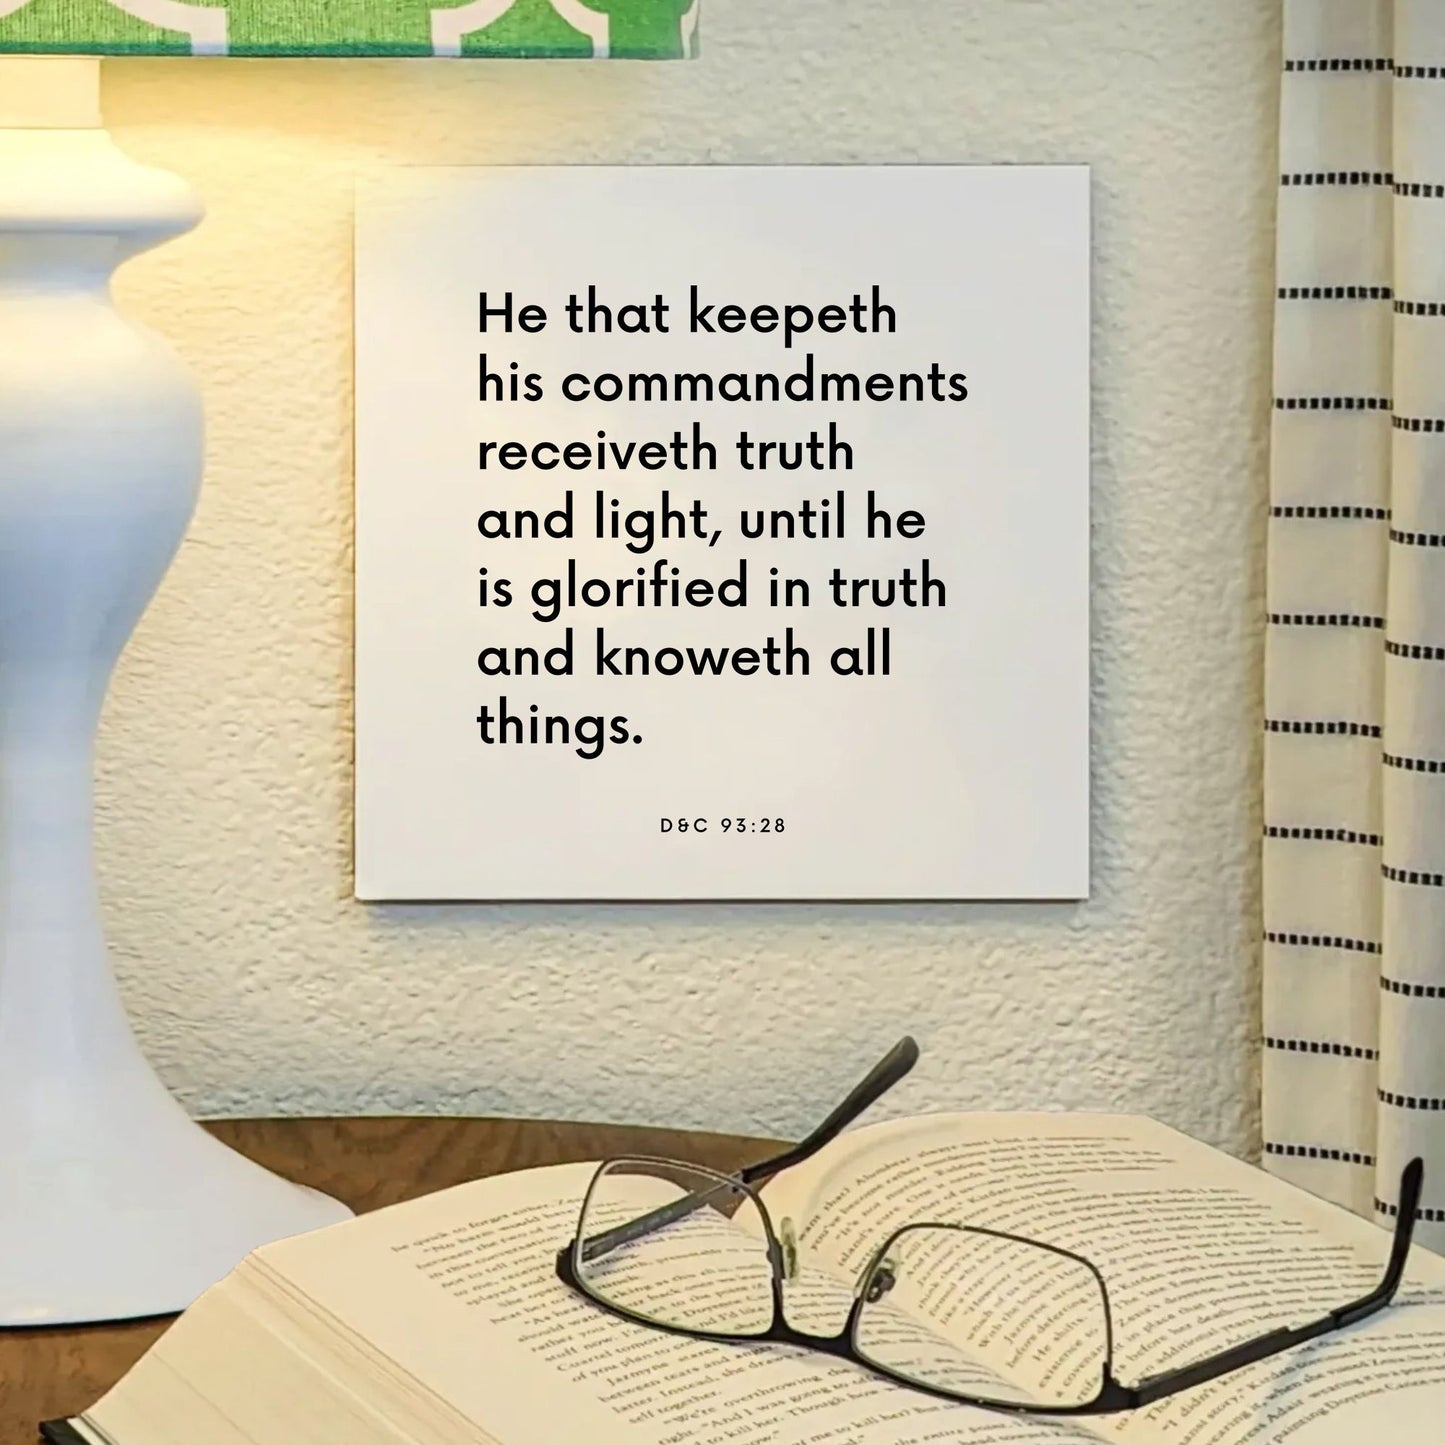 Lamp mouting of the scripture tile for D&C 93:28 - "He that keepeth his commandments receiveth truth and light"